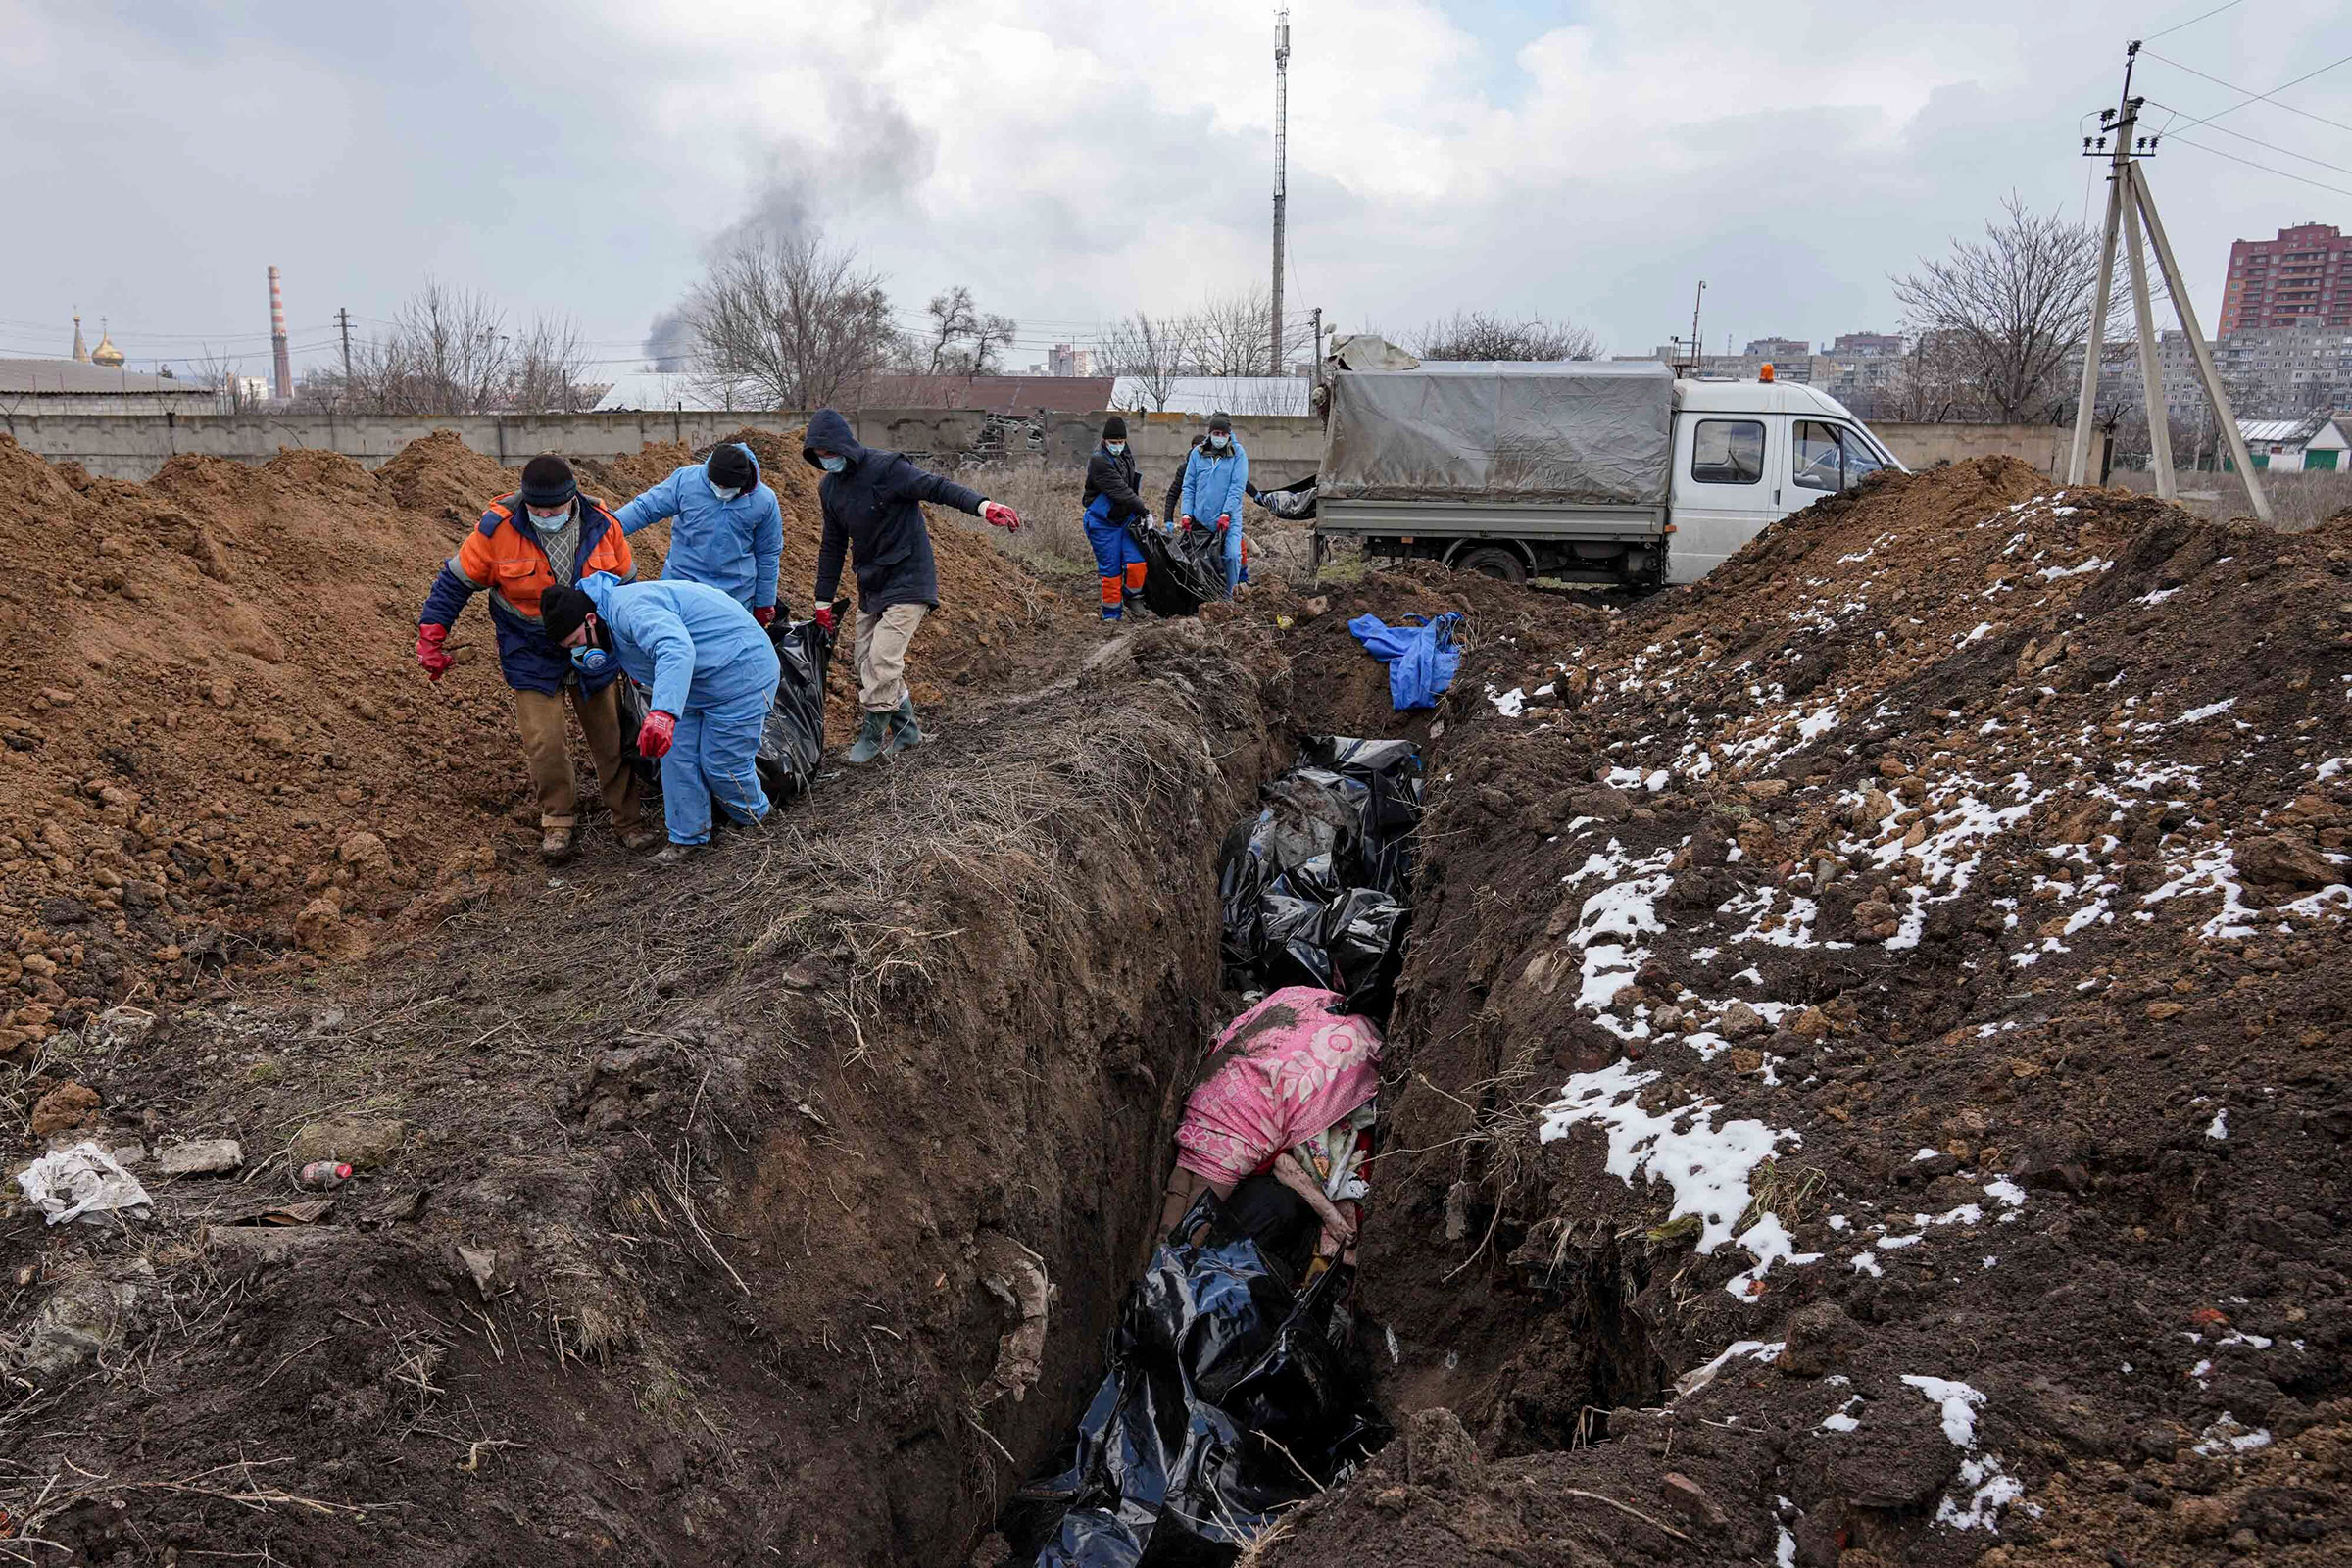 Dead bodies are put into a mass grave on the outskirts of Mariupol on March 9 as people cannot bury their dead because of the heavy shelling by Russian forces.